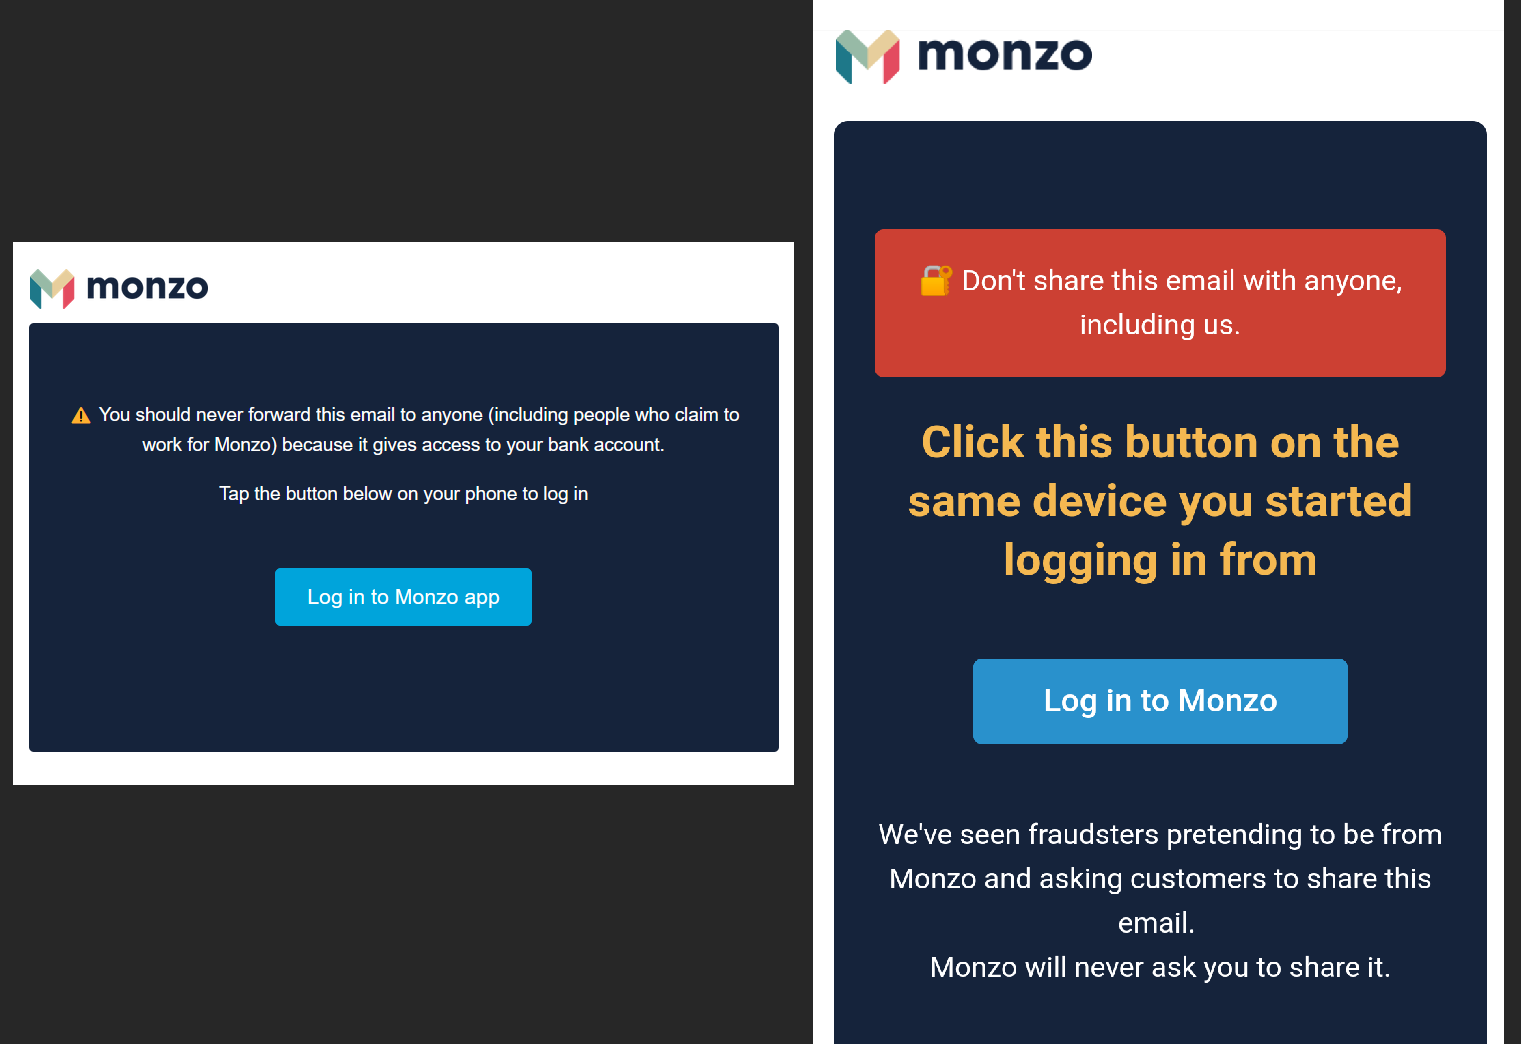 Link sent by Monzo upon first login on new device